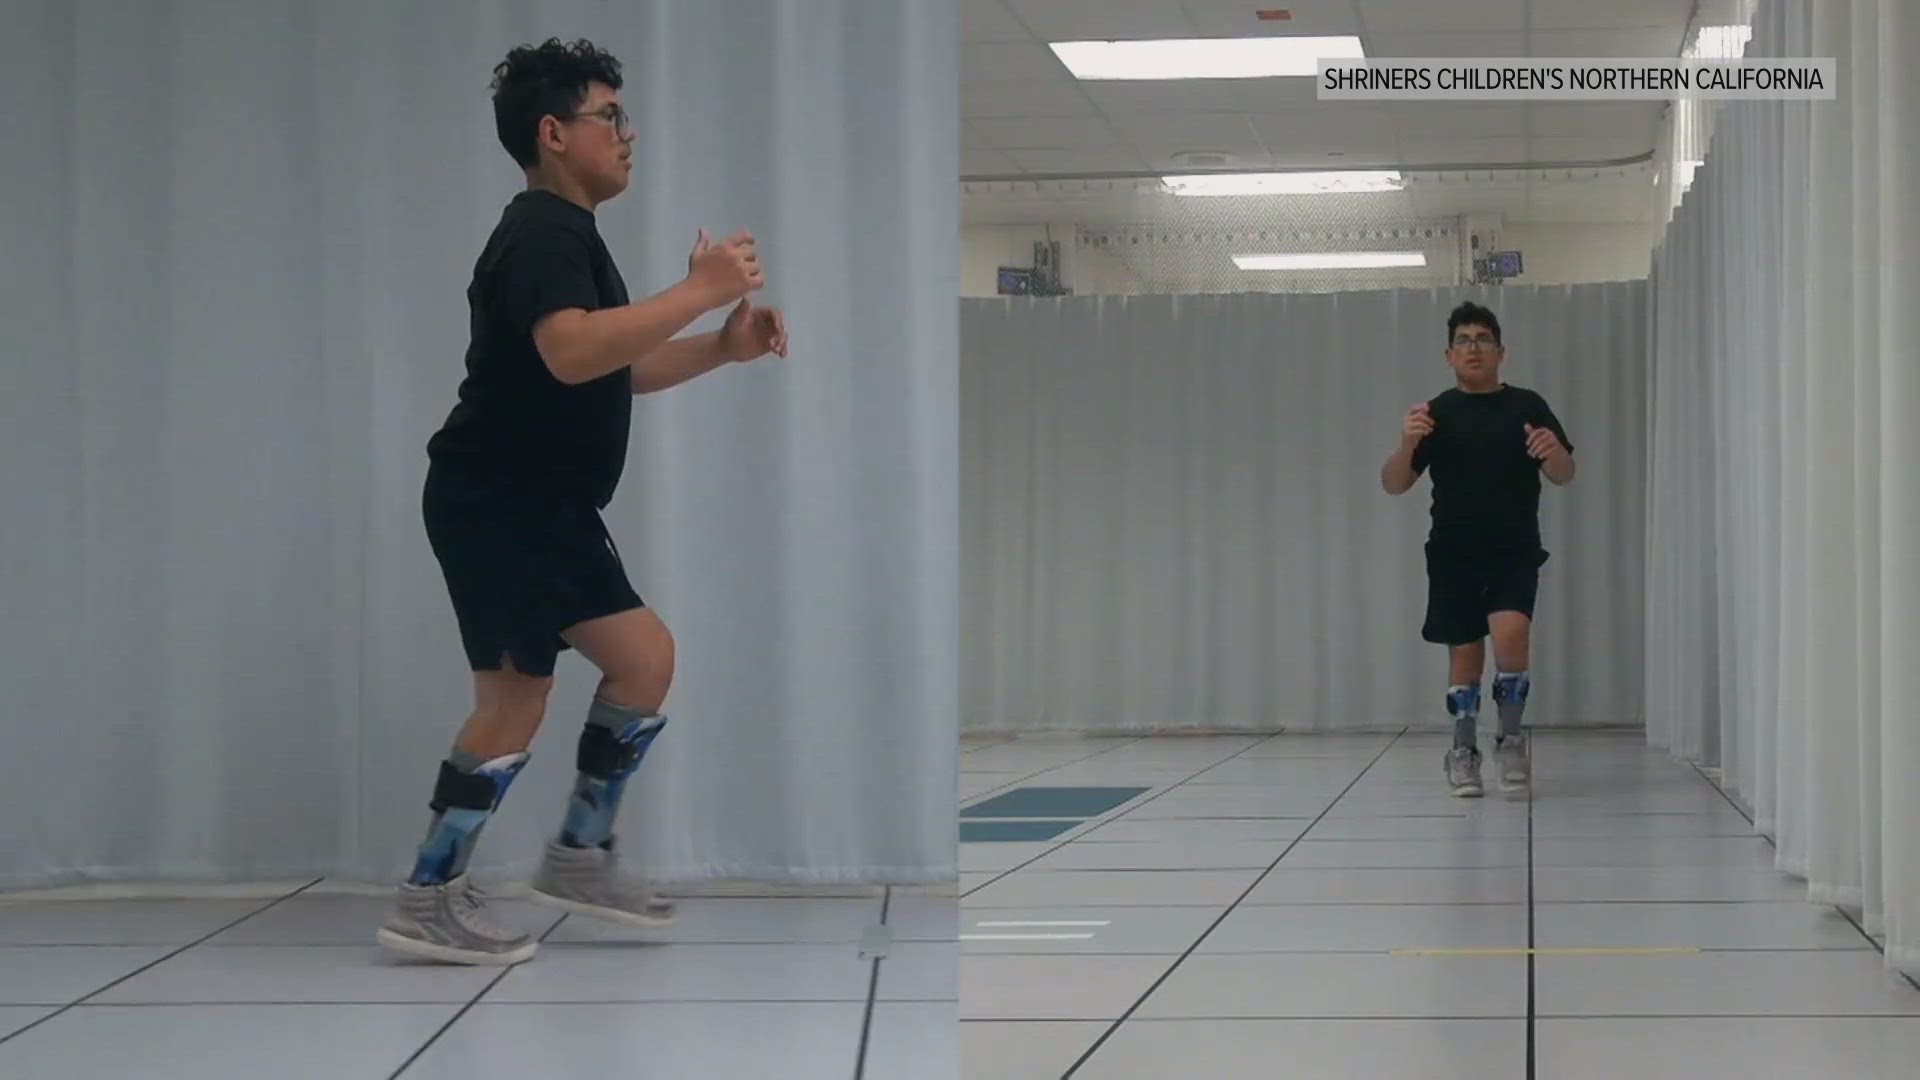 Motion capture technology, similar to what you would see in Hollywood, is applied to analyze gait and better target surgical treatment for cerebral palsy.